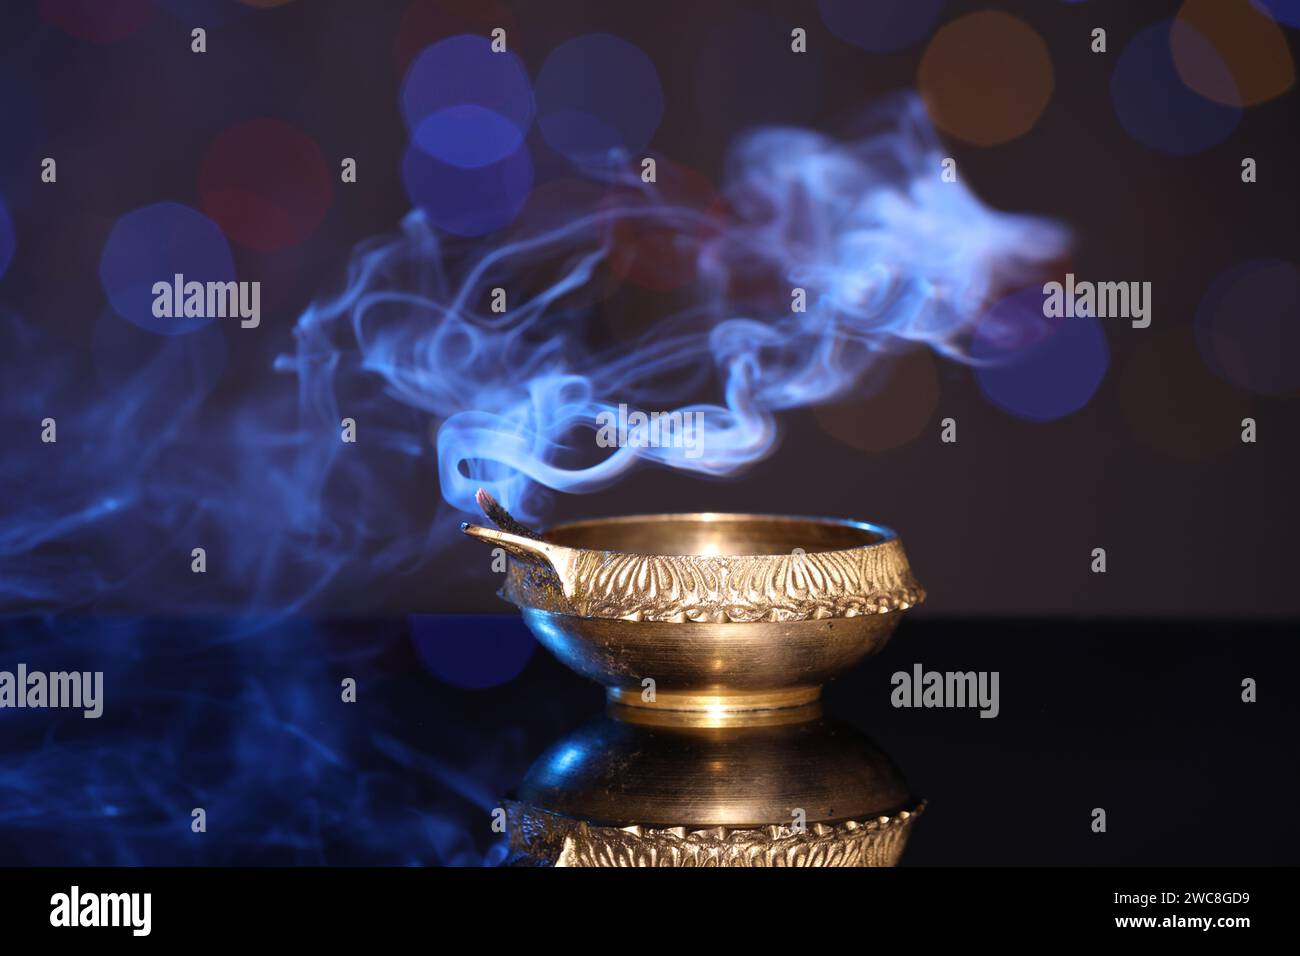 Blown out diya on dark background with blurred lights. Diwali lamp Stock Photo